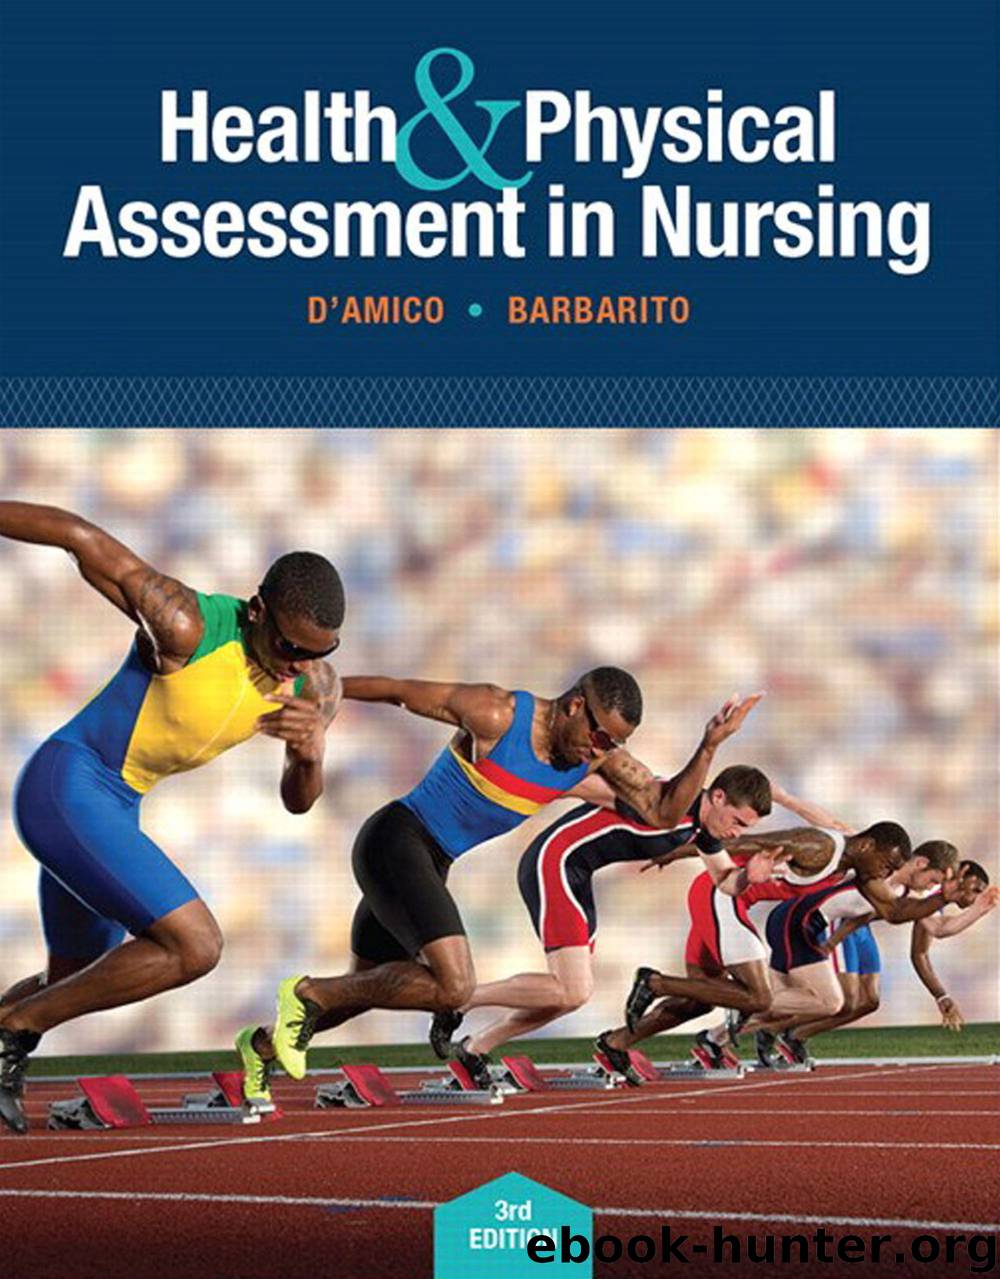 Health & Physical Assessment in Nursing by Damico & Barbarito